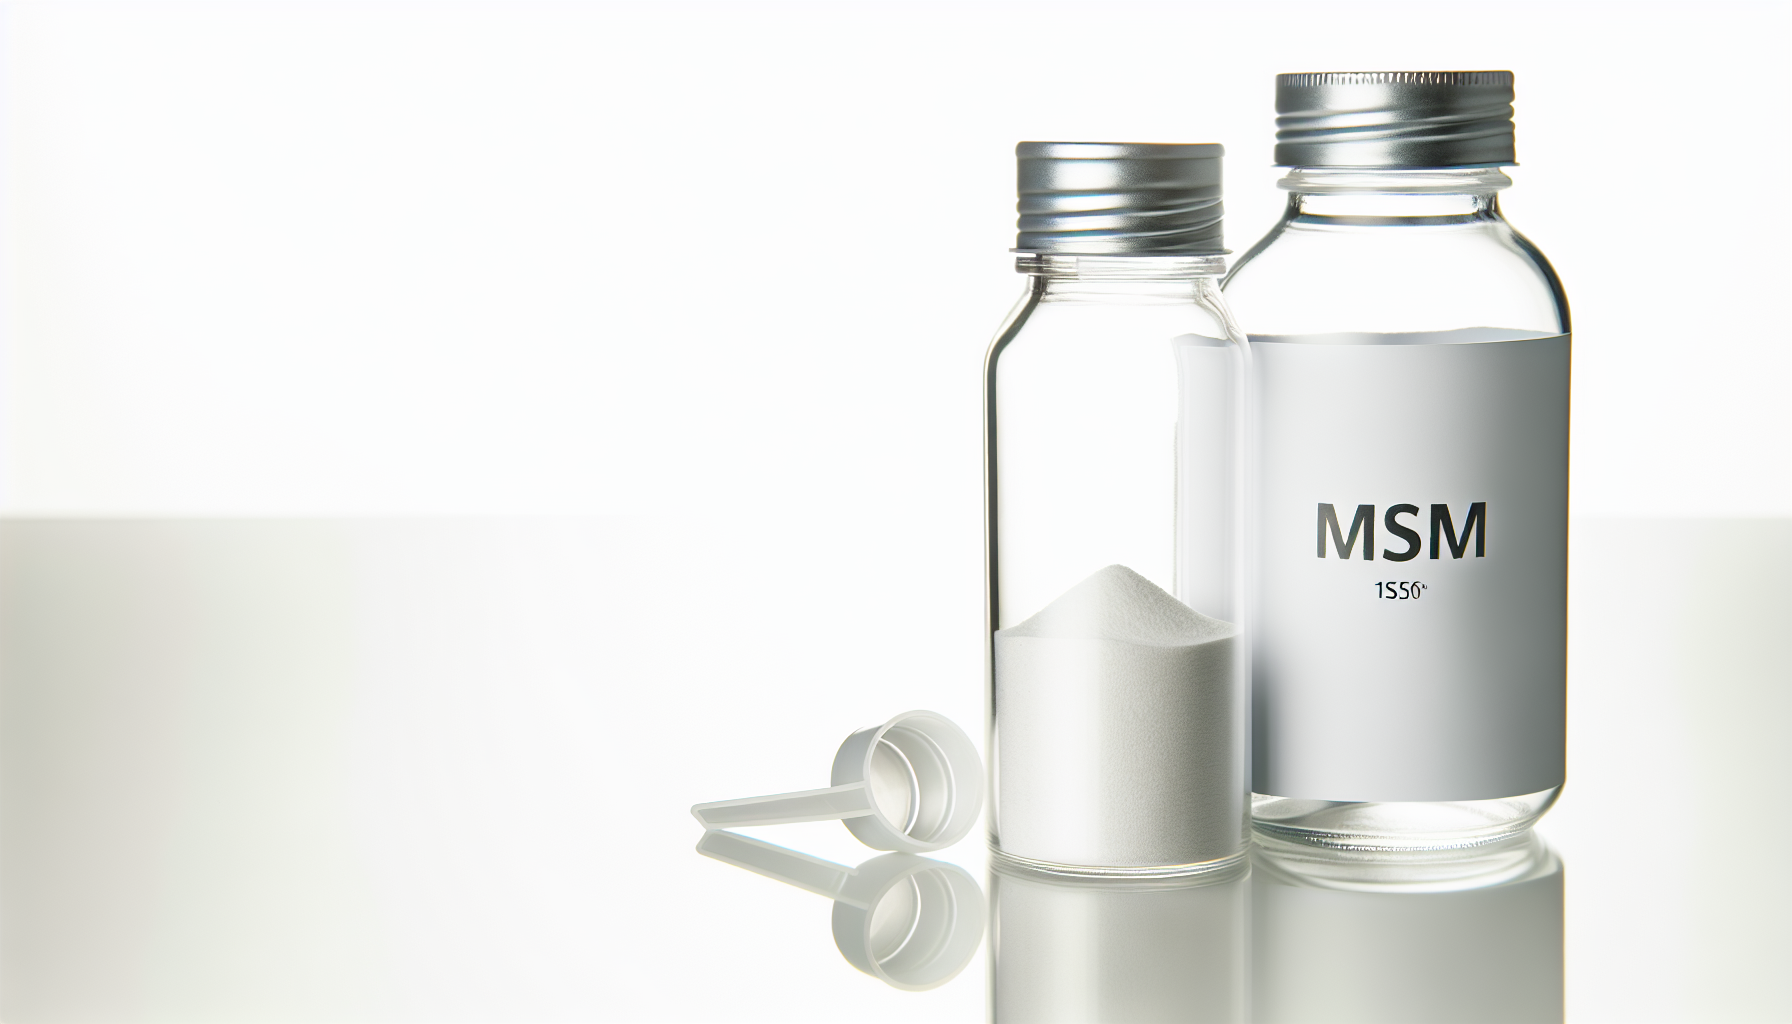 A bottle of MSM supplements and a measuring scoop on a white background